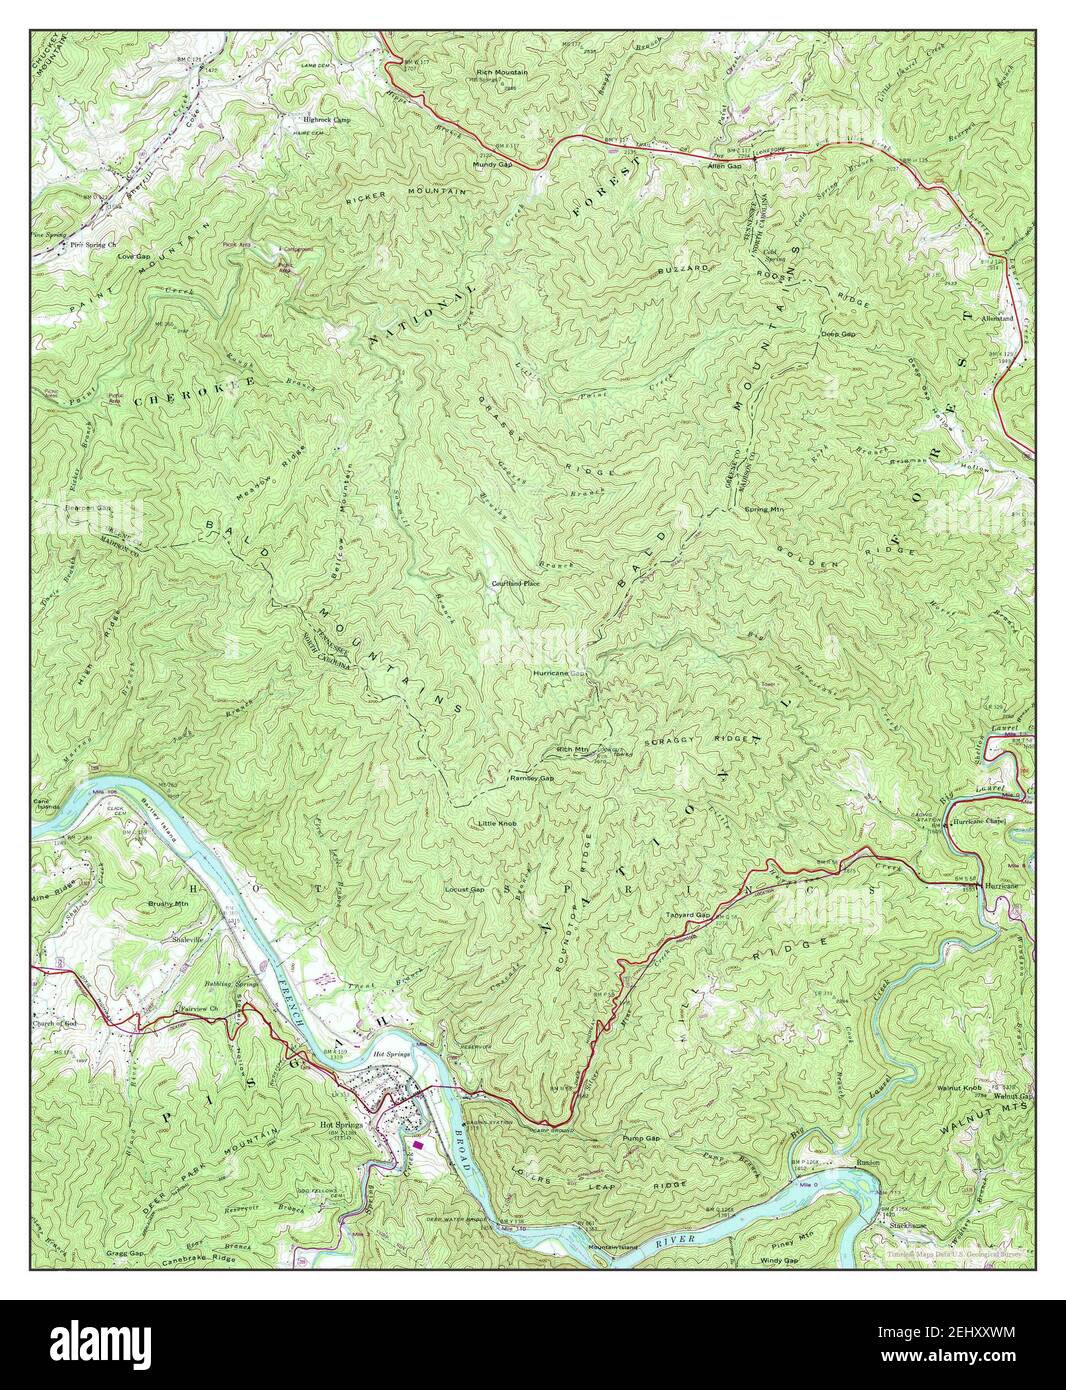 Hot Springs North Carolina Map 1940 124000 United States Of America By Timeless Maps Data 3023